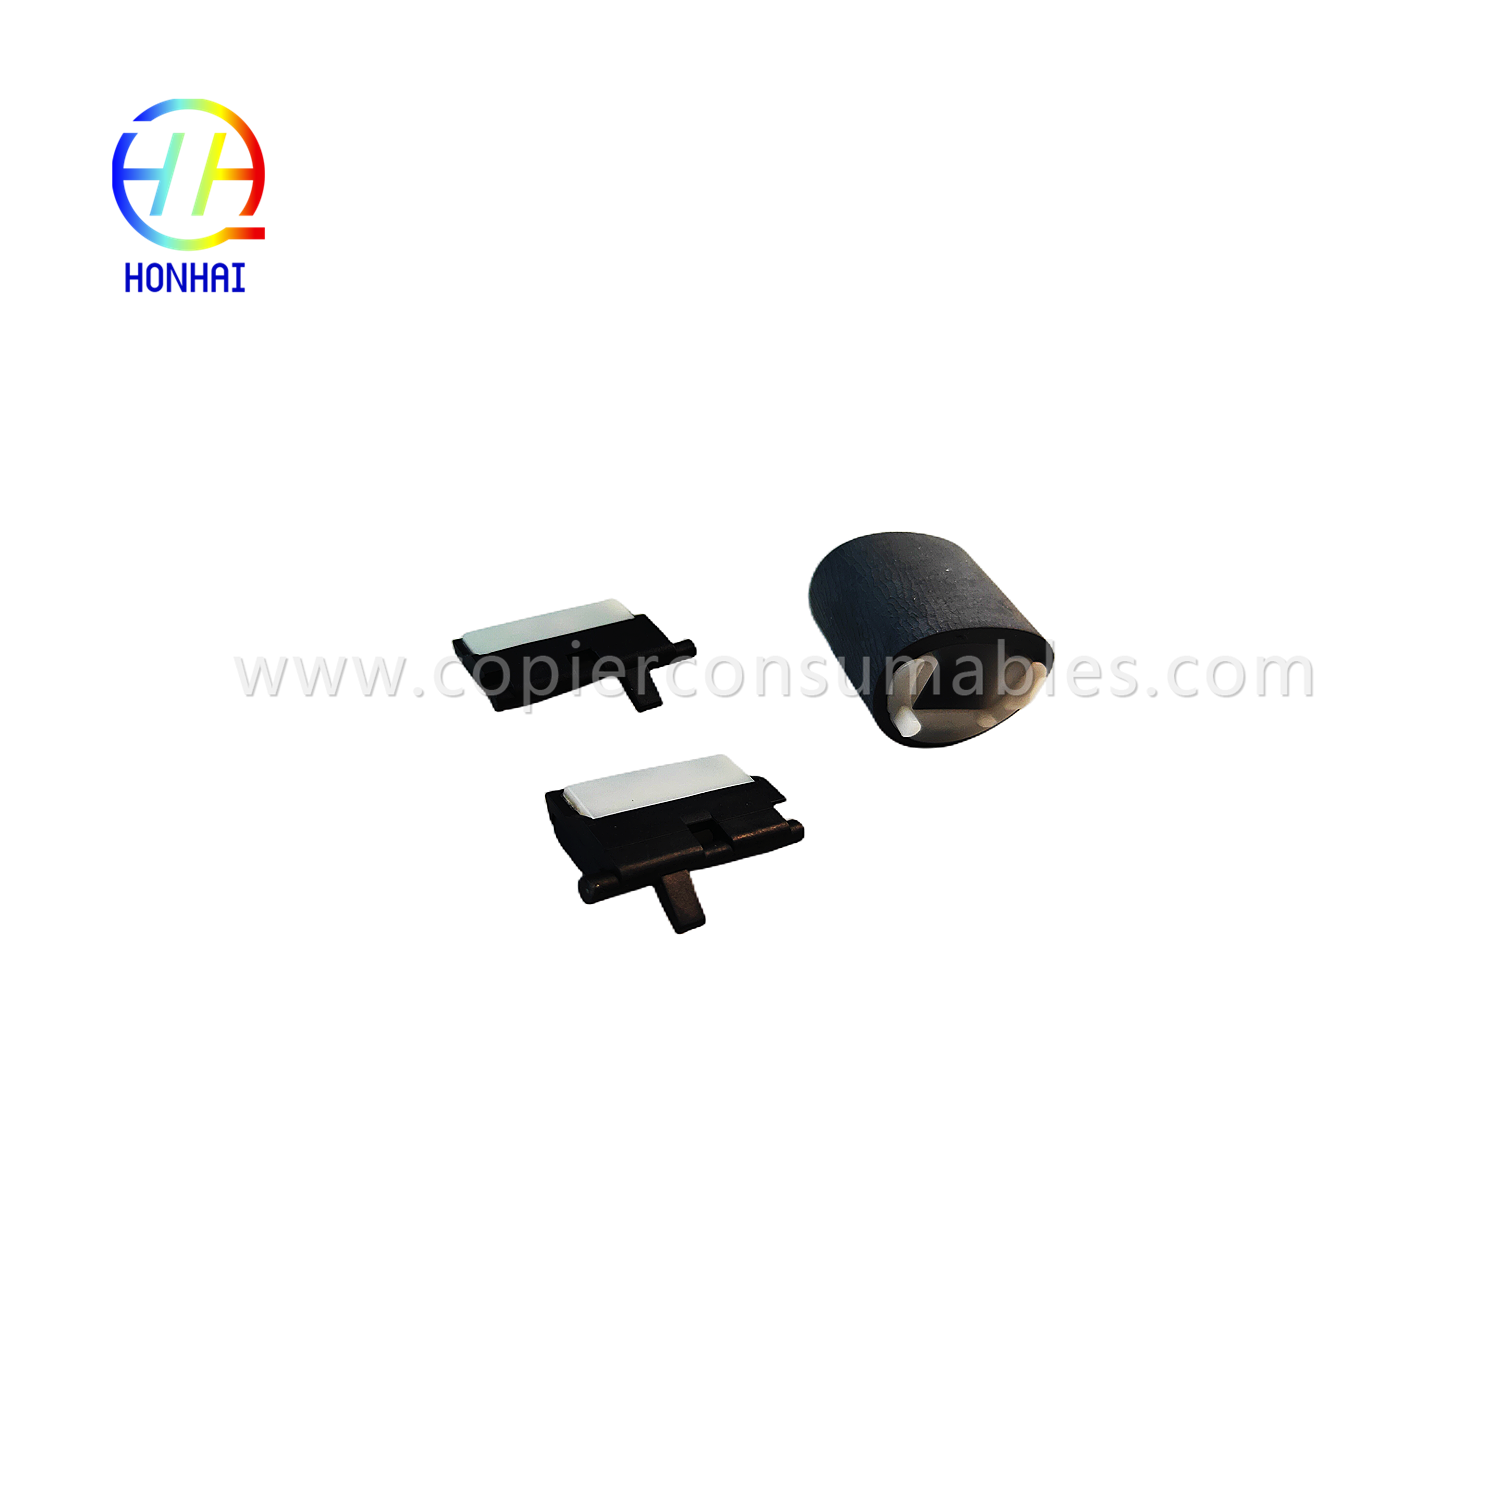 https://www.copierconsumables.com/paper-pickup-roller-separates-pad%ef%bc%88set%ef%bc%89for-hp-pagewide-x585z-x451dn-x476dn-x551dw-x576dw-5856dn-5856dn 452dn-477dn-552-577z-cb780-60012-product/